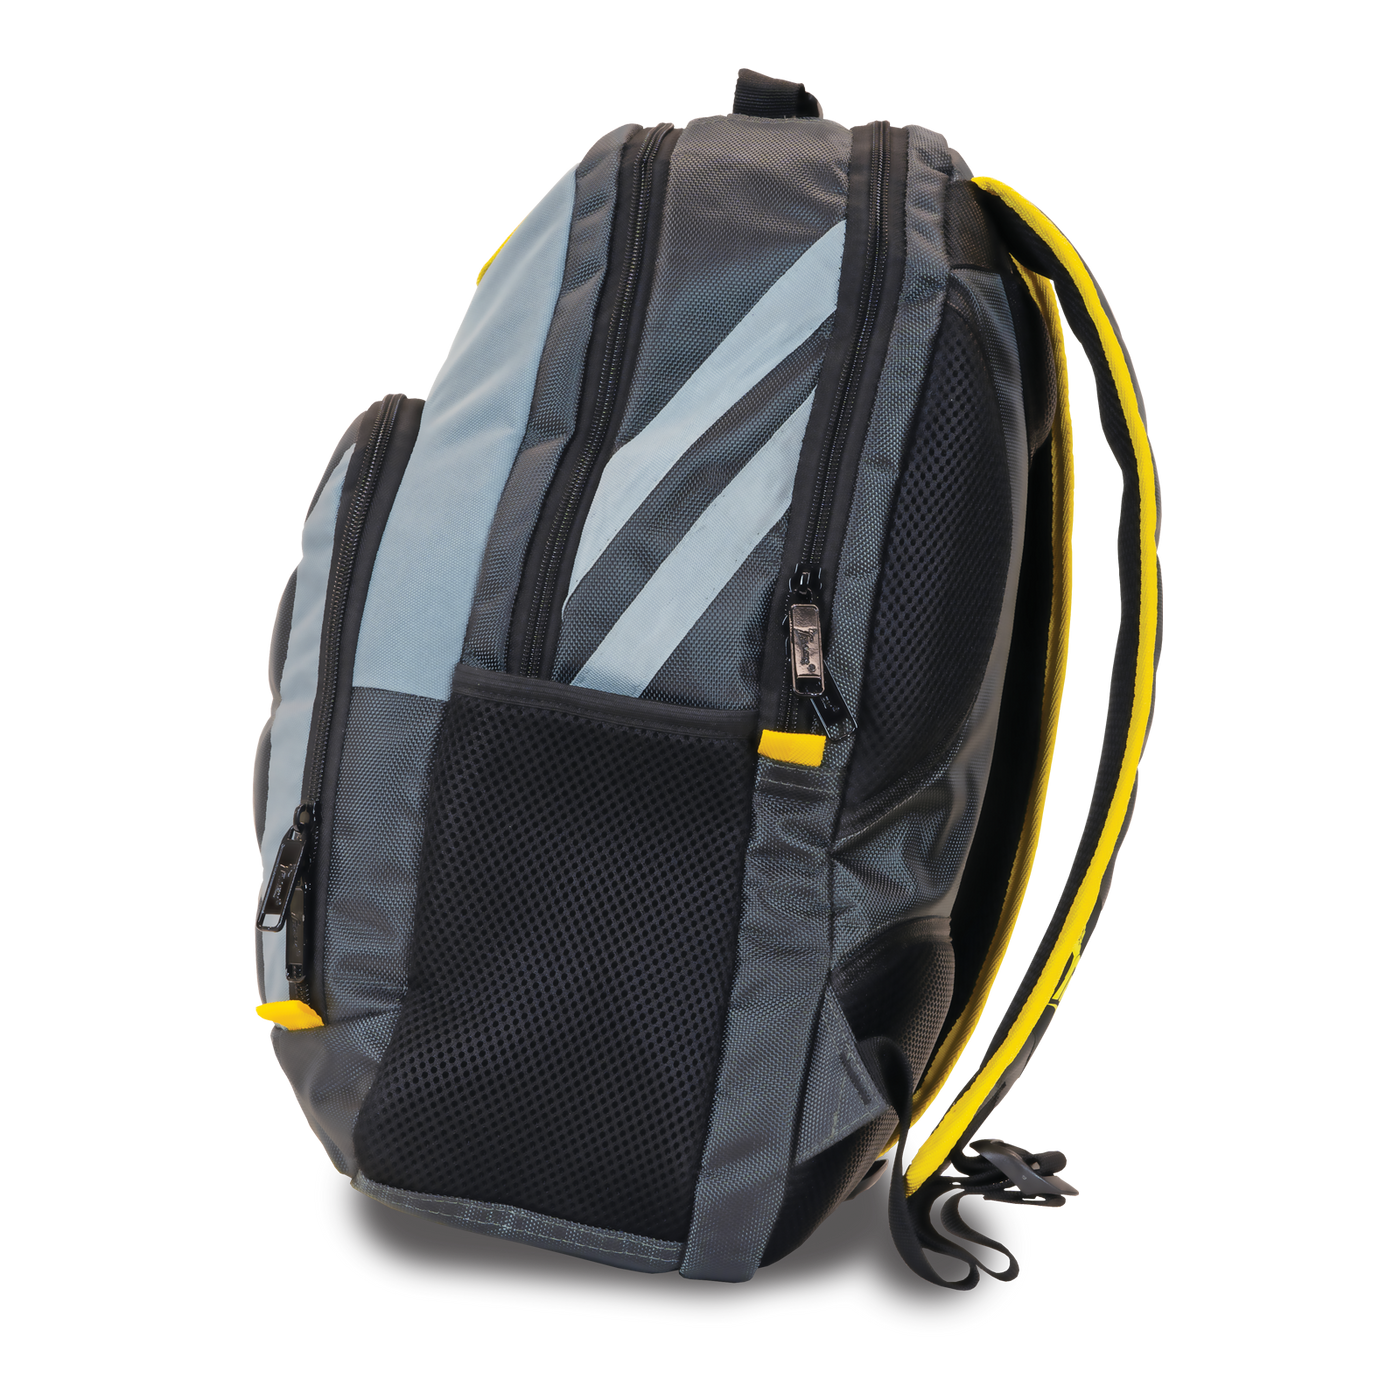 Select Backpack side view in grey, dark grey, and yellow